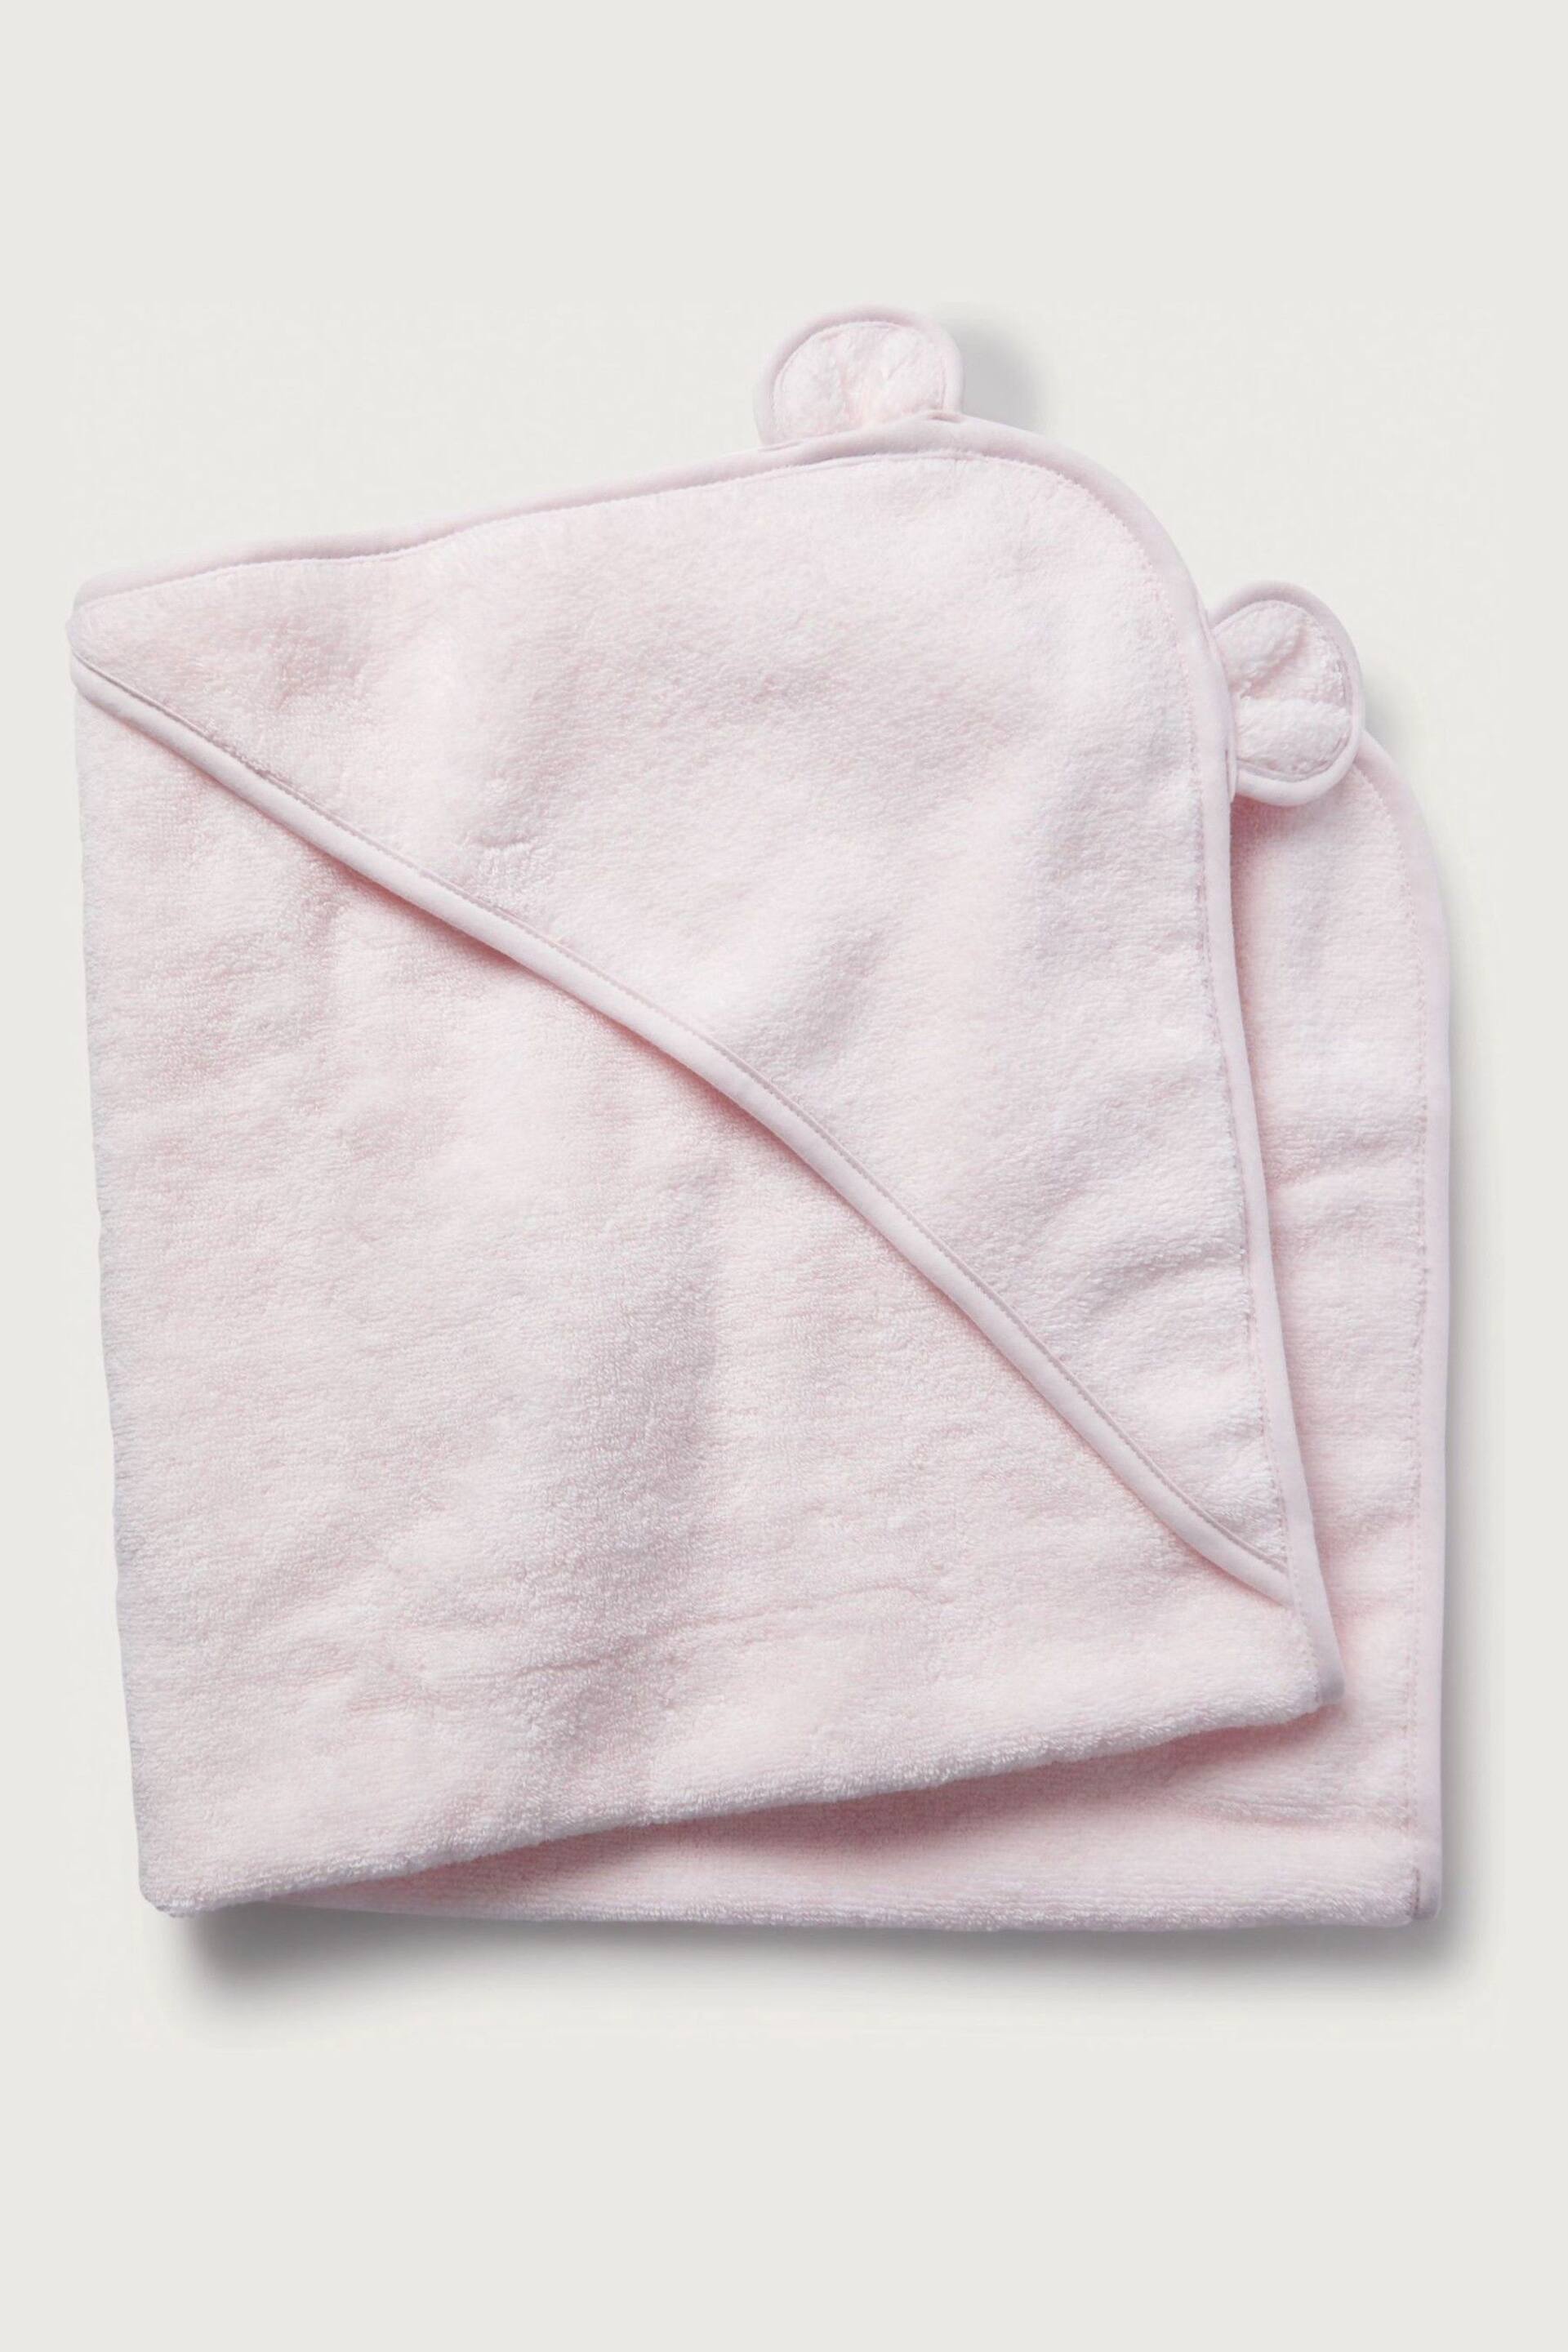 The White Company White Baby Bear Hooded Towel - Image 3 of 3